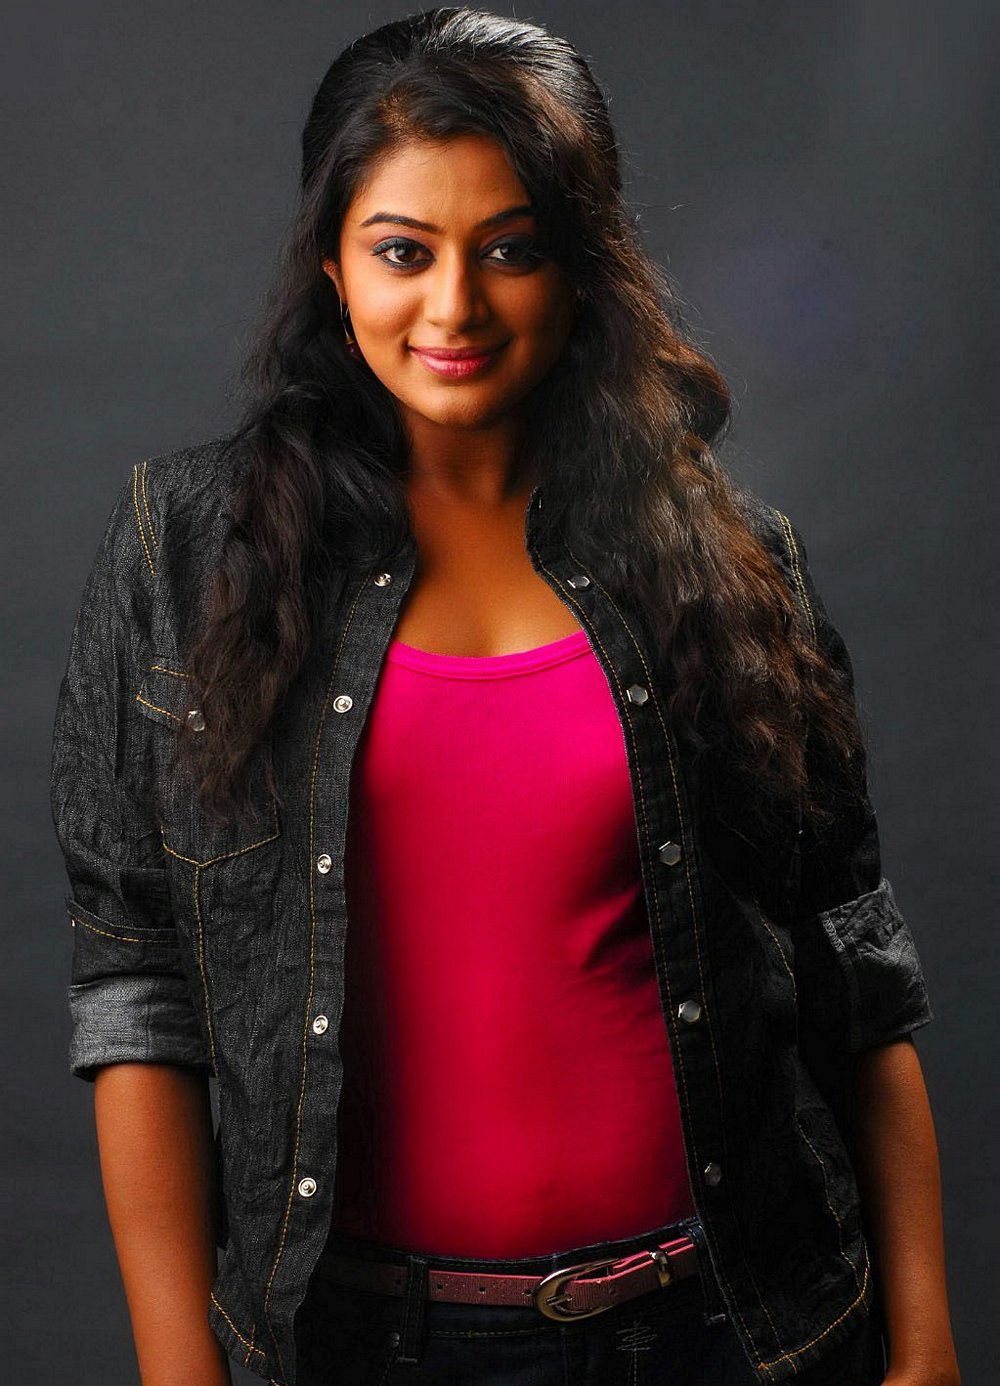 Priyamani hd wallpapers - HIGH RESOLUTION PICTURES